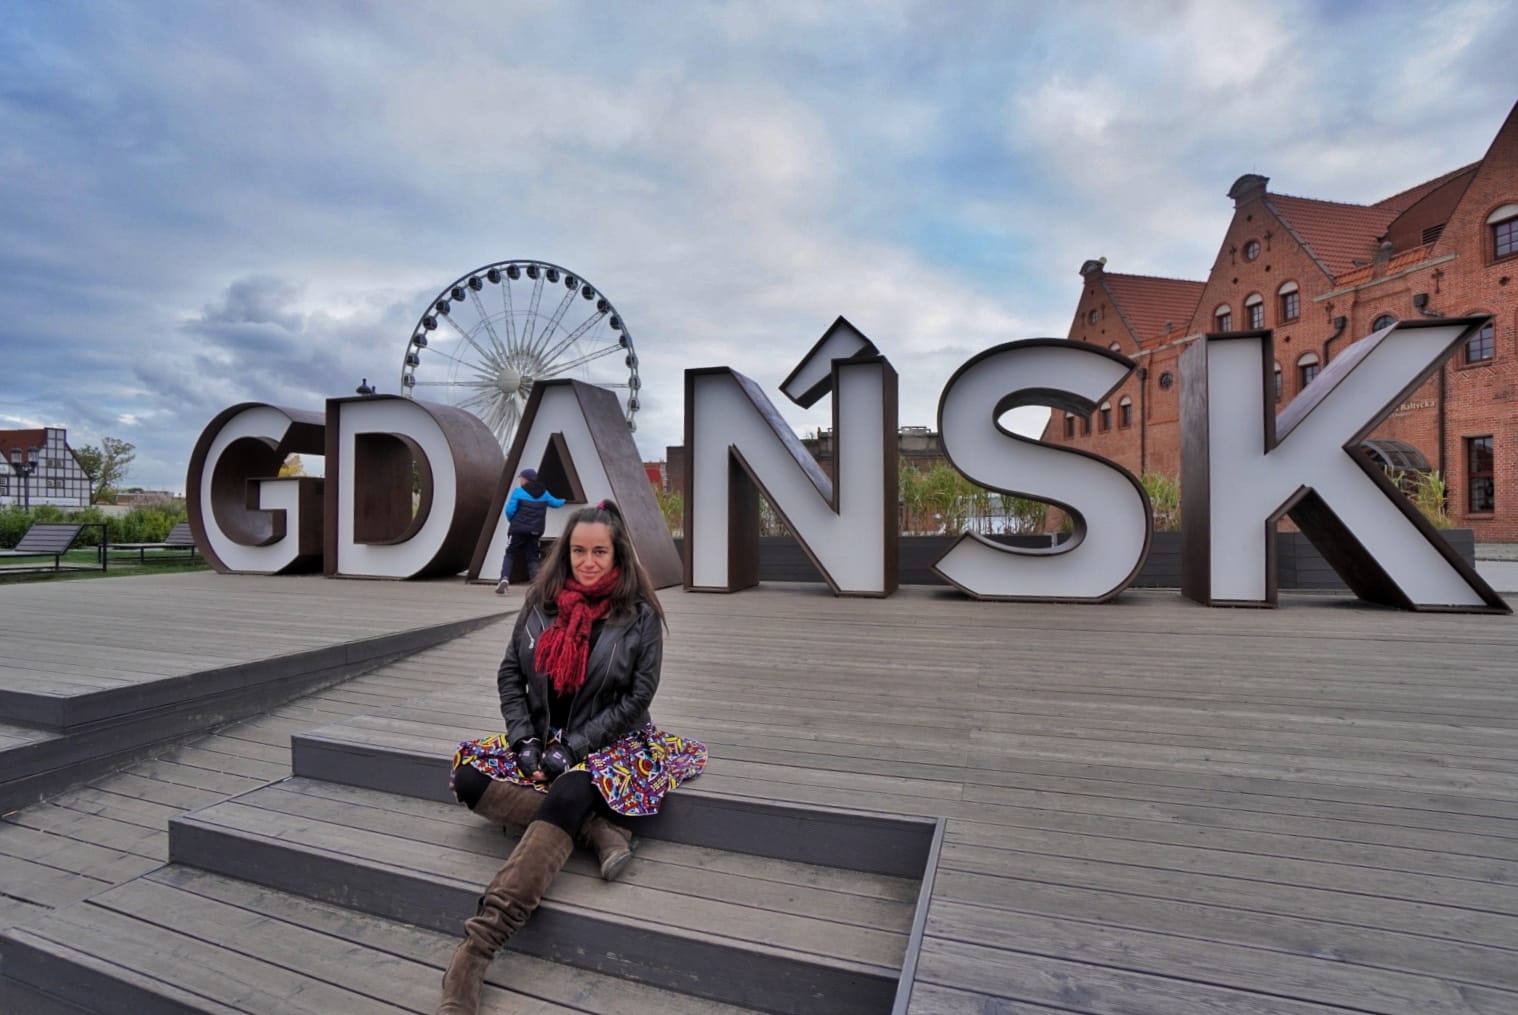 Pilar with the fairies wheel on the back and the Gdansk city letters